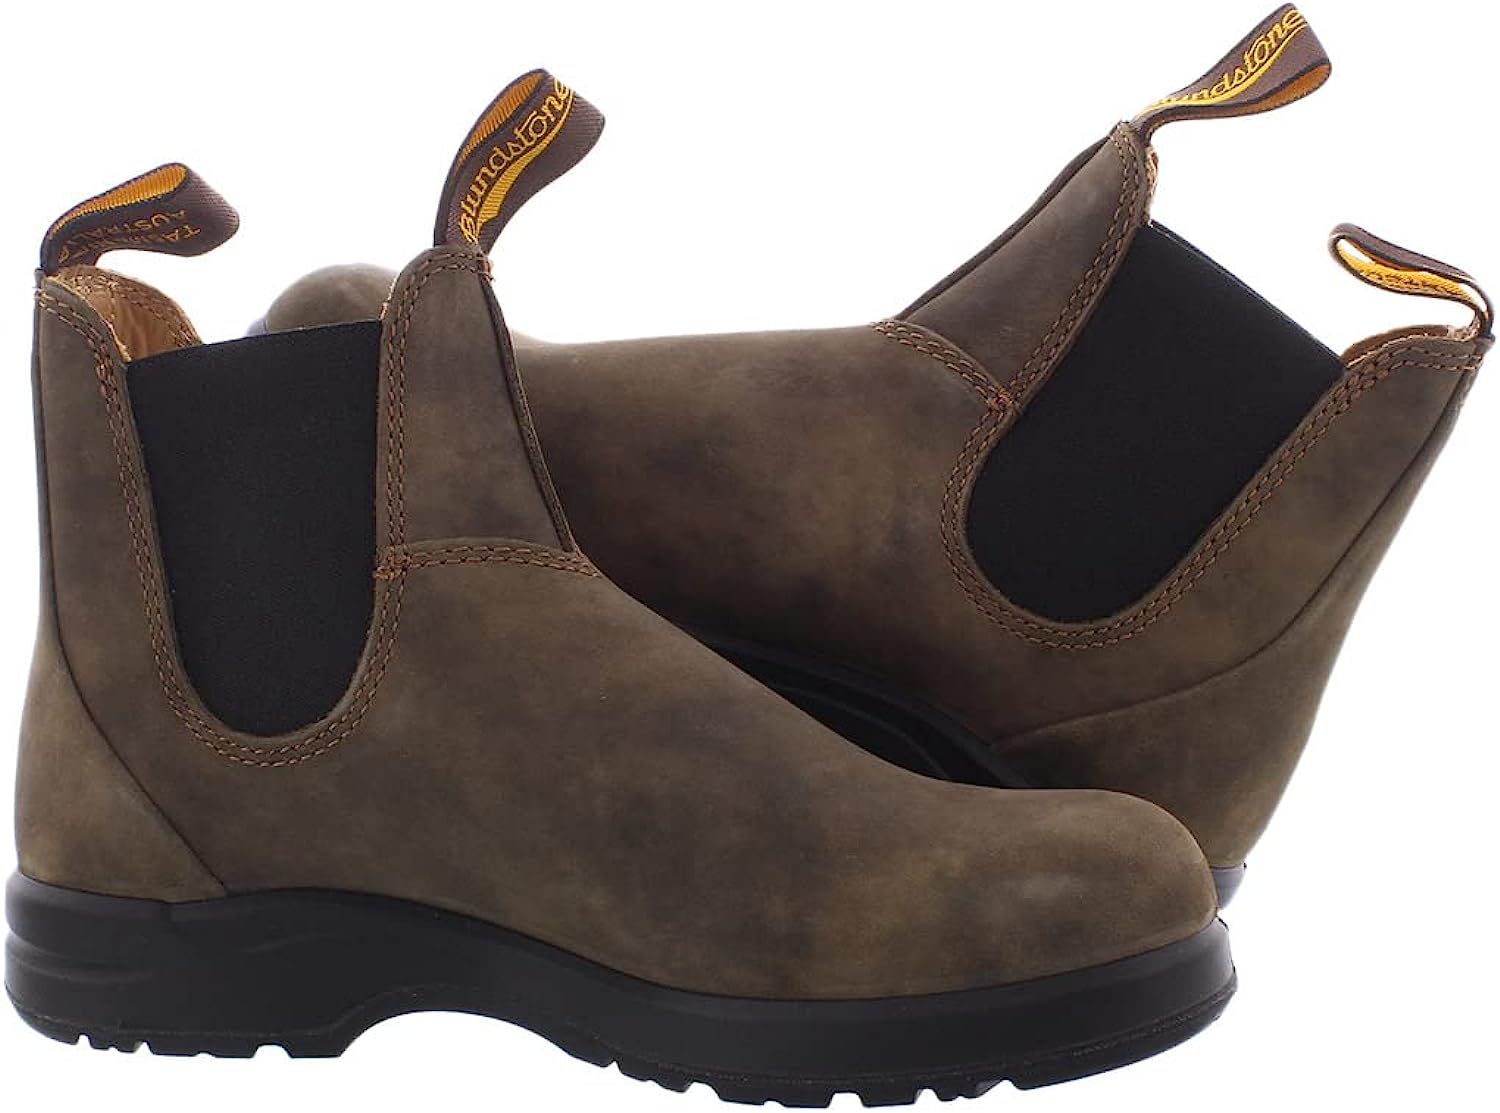 Blundstone BL550 Classic 550 Chelsea Boot Review